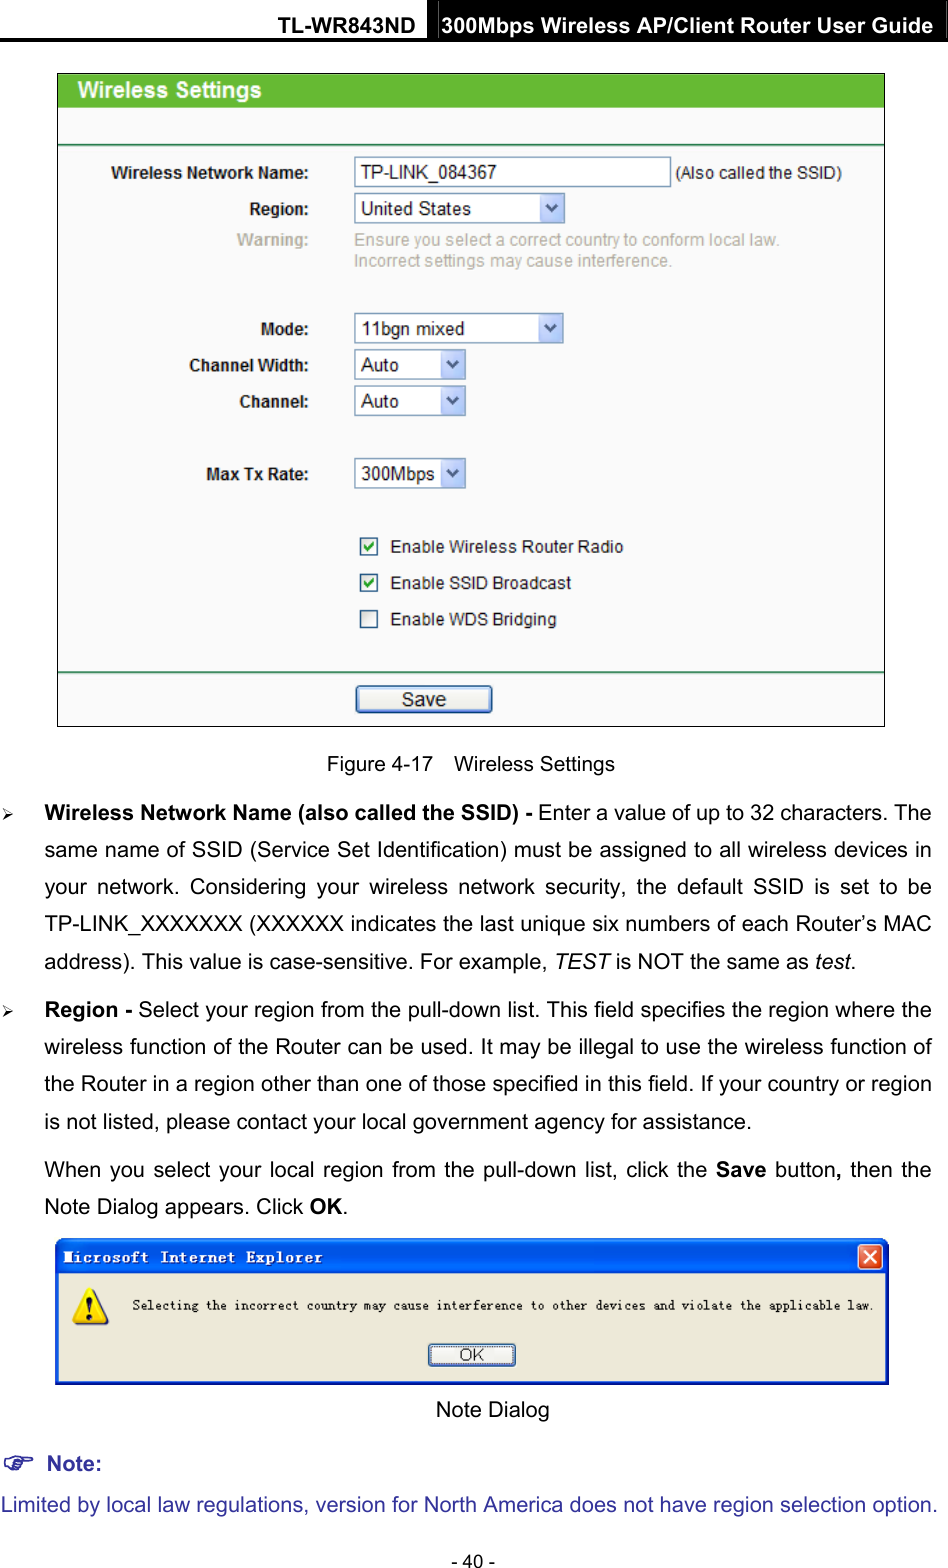 TL-WR843ND 300Mbps Wireless AP/Client Router User Guide - 40 -  Figure 4-17  Wireless Settings  Wireless Network Name (also called the SSID) - Enter a value of up to 32 characters. The same name of SSID (Service Set Identification) must be assigned to all wireless devices in your network. Considering your wireless network security, the default SSID is set to be TP-LINK_XXXXXXX (XXXXXX indicates the last unique six numbers of each Router’s MAC address). This value is case-sensitive. For example, TEST is NOT the same as test.  Region - Select your region from the pull-down list. This field specifies the region where the wireless function of the Router can be used. It may be illegal to use the wireless function of the Router in a region other than one of those specified in this field. If your country or region is not listed, please contact your local government agency for assistance. When you select your local region from the pull-down list, click the Save button, then the Note Dialog appears. Click OK.  Note Dialog    Note: Limited by local law regulations, version for North America does not have region selection option. 